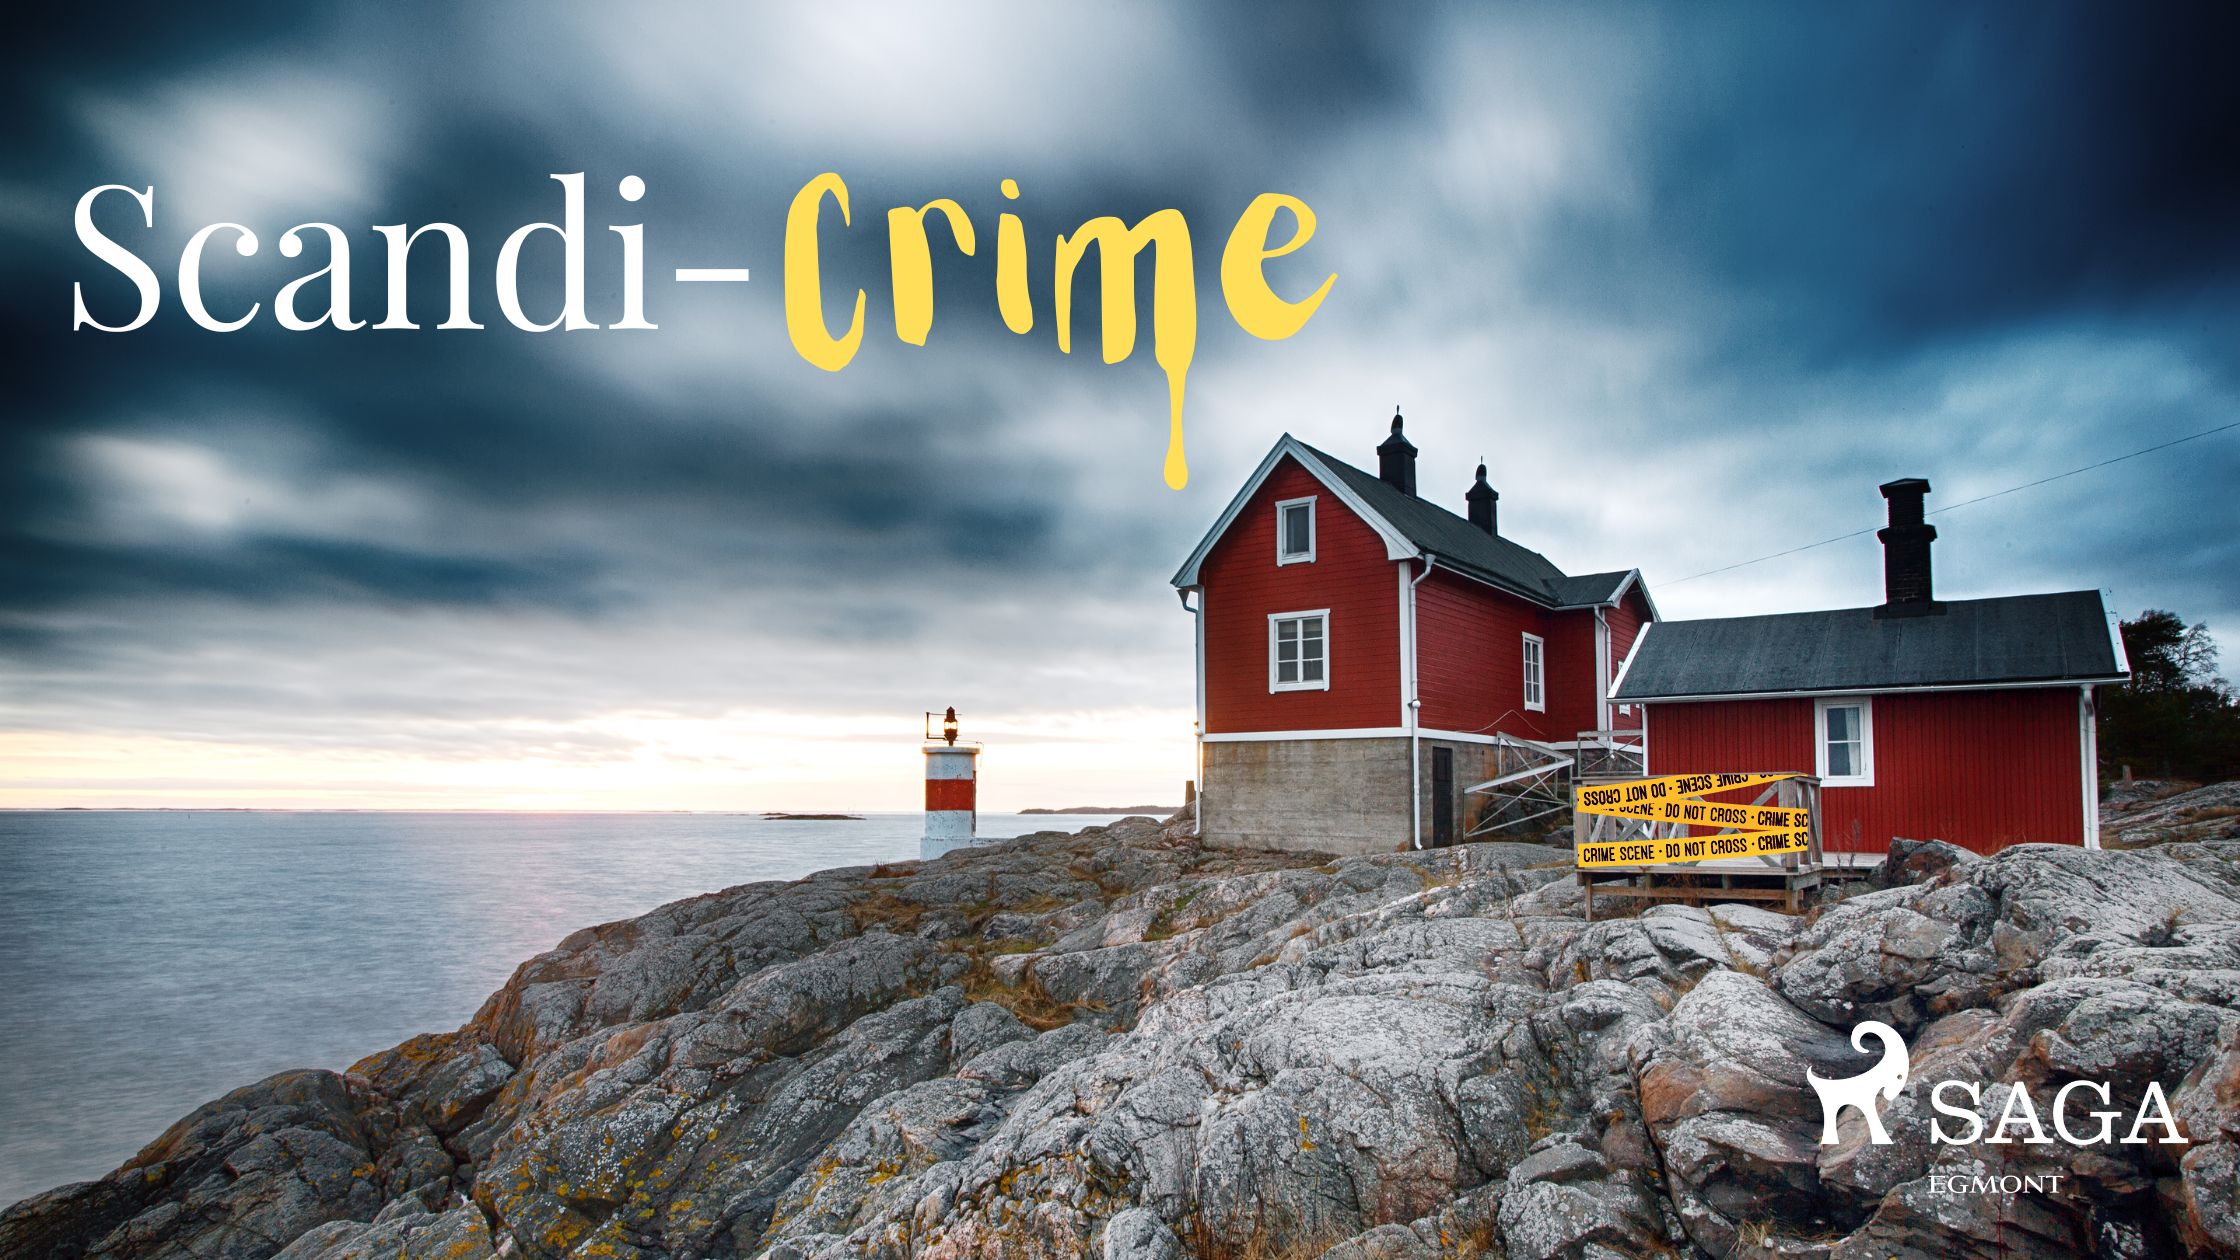 31 scandi-crime titles to make your readers scream